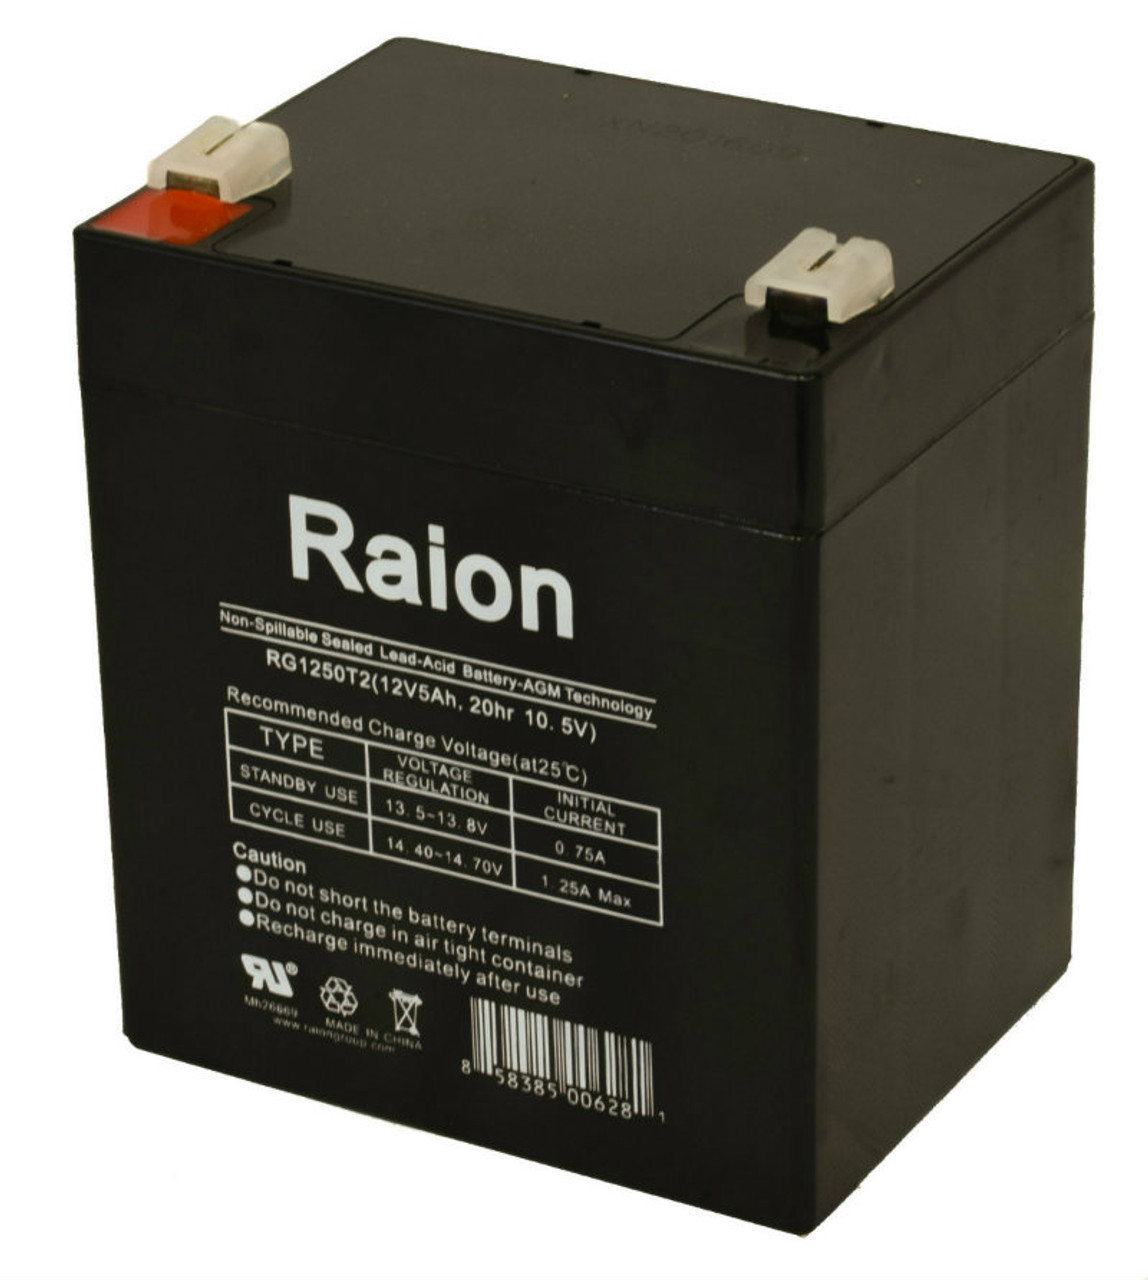 Raion Power RG1250T1 Replacement Emergency Light Battery for Fire Lite MP12